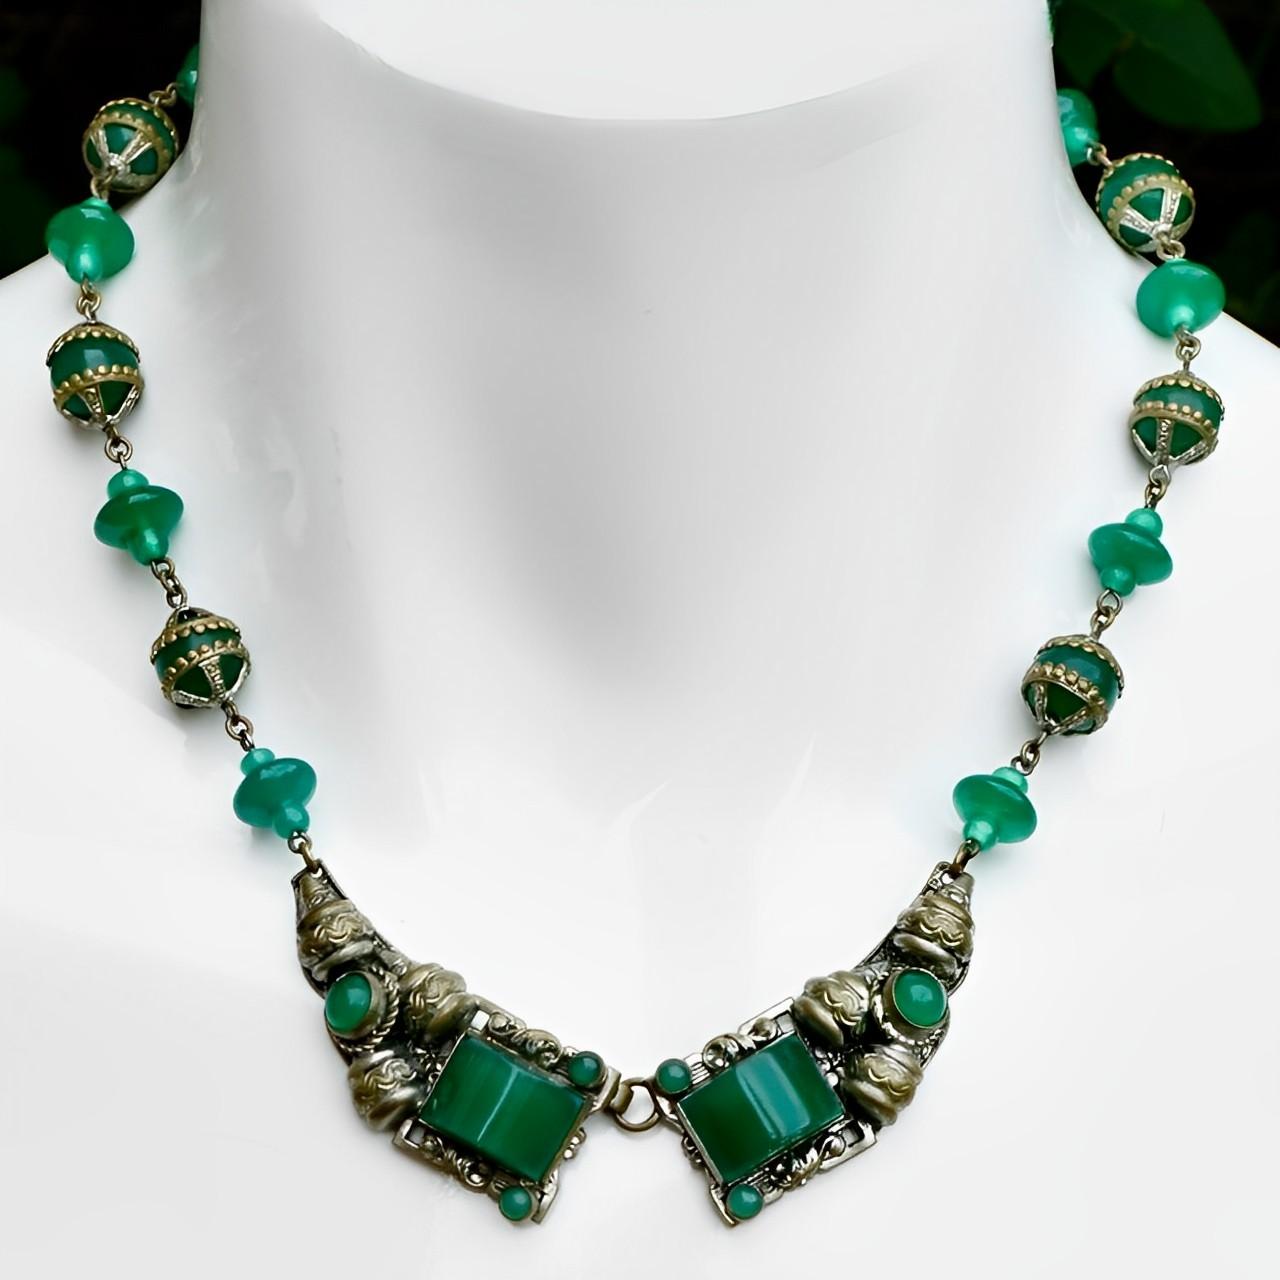 Wonderful Czech ornate silver plated necklace, featuring green glass. The necklace fastens at the front. Measuring necklace length 43.2 cm / 17 inches. Most of the silver plating has worn to reveal a lovely bronze tone metal underneath. One of the